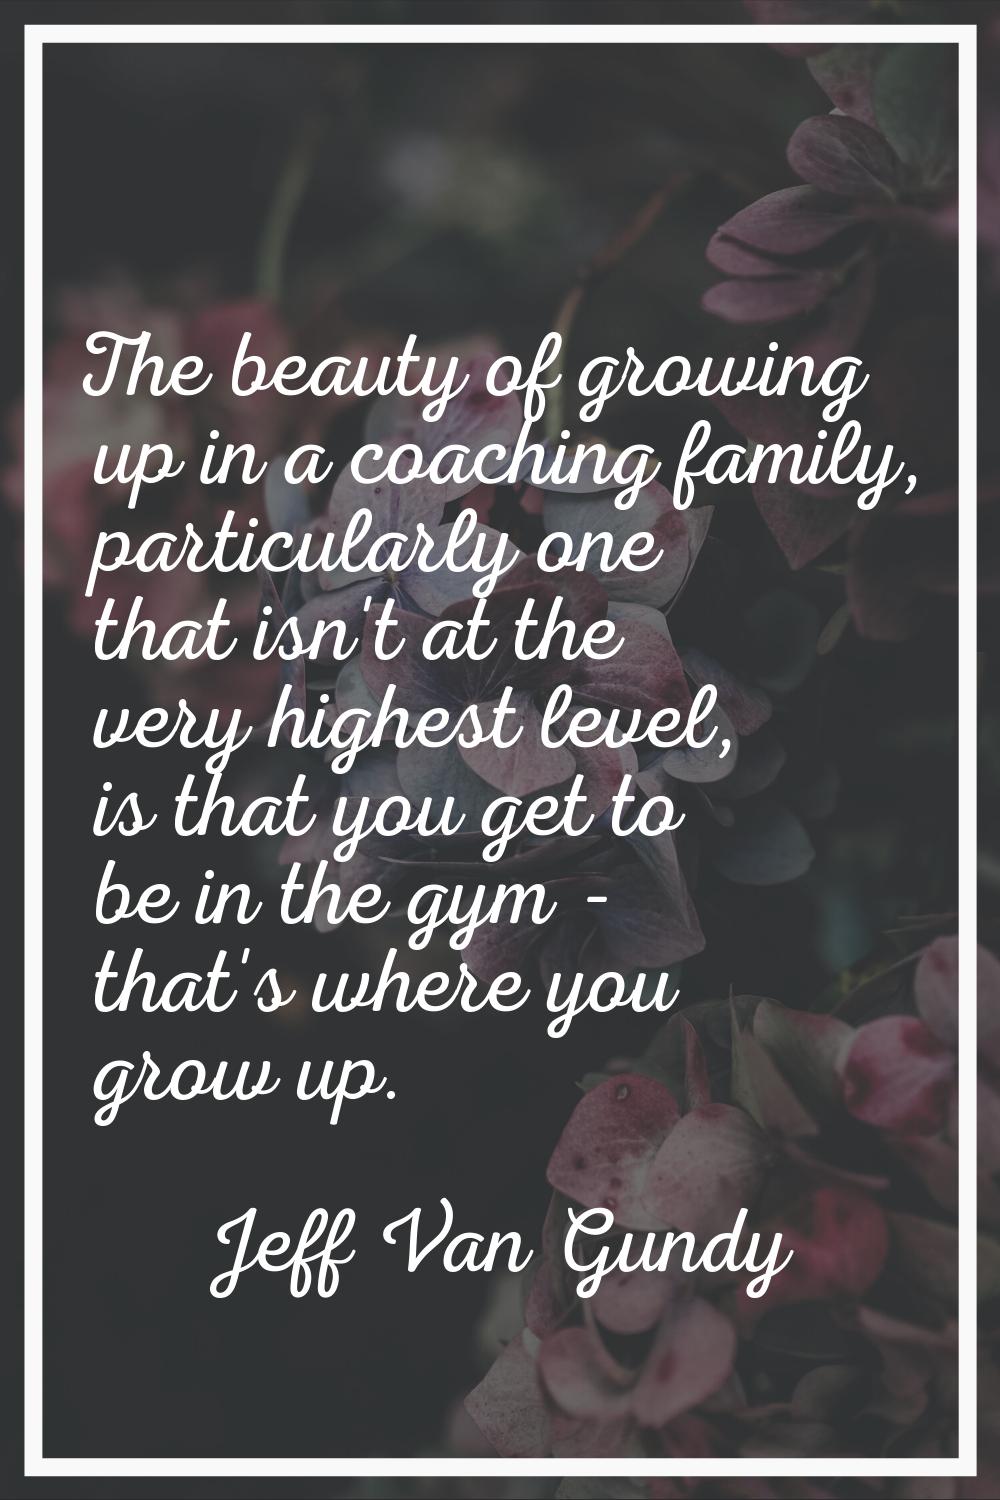 The beauty of growing up in a coaching family, particularly one that isn't at the very highest leve